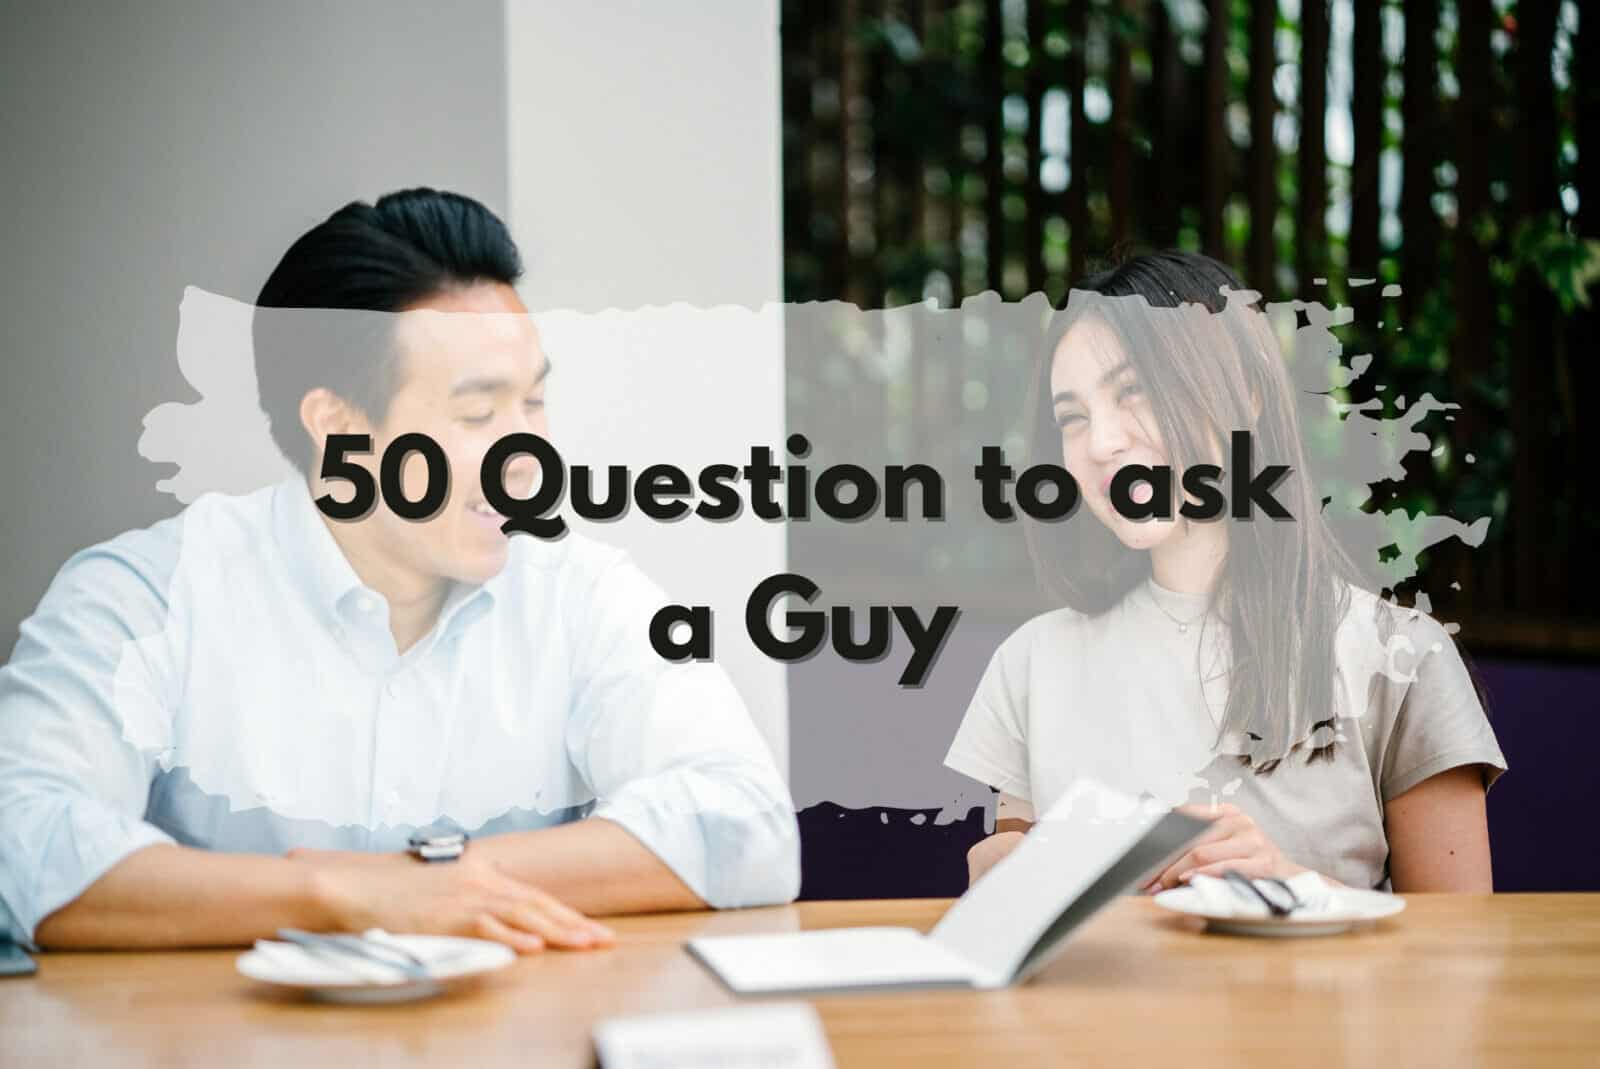 50 questions for guys.